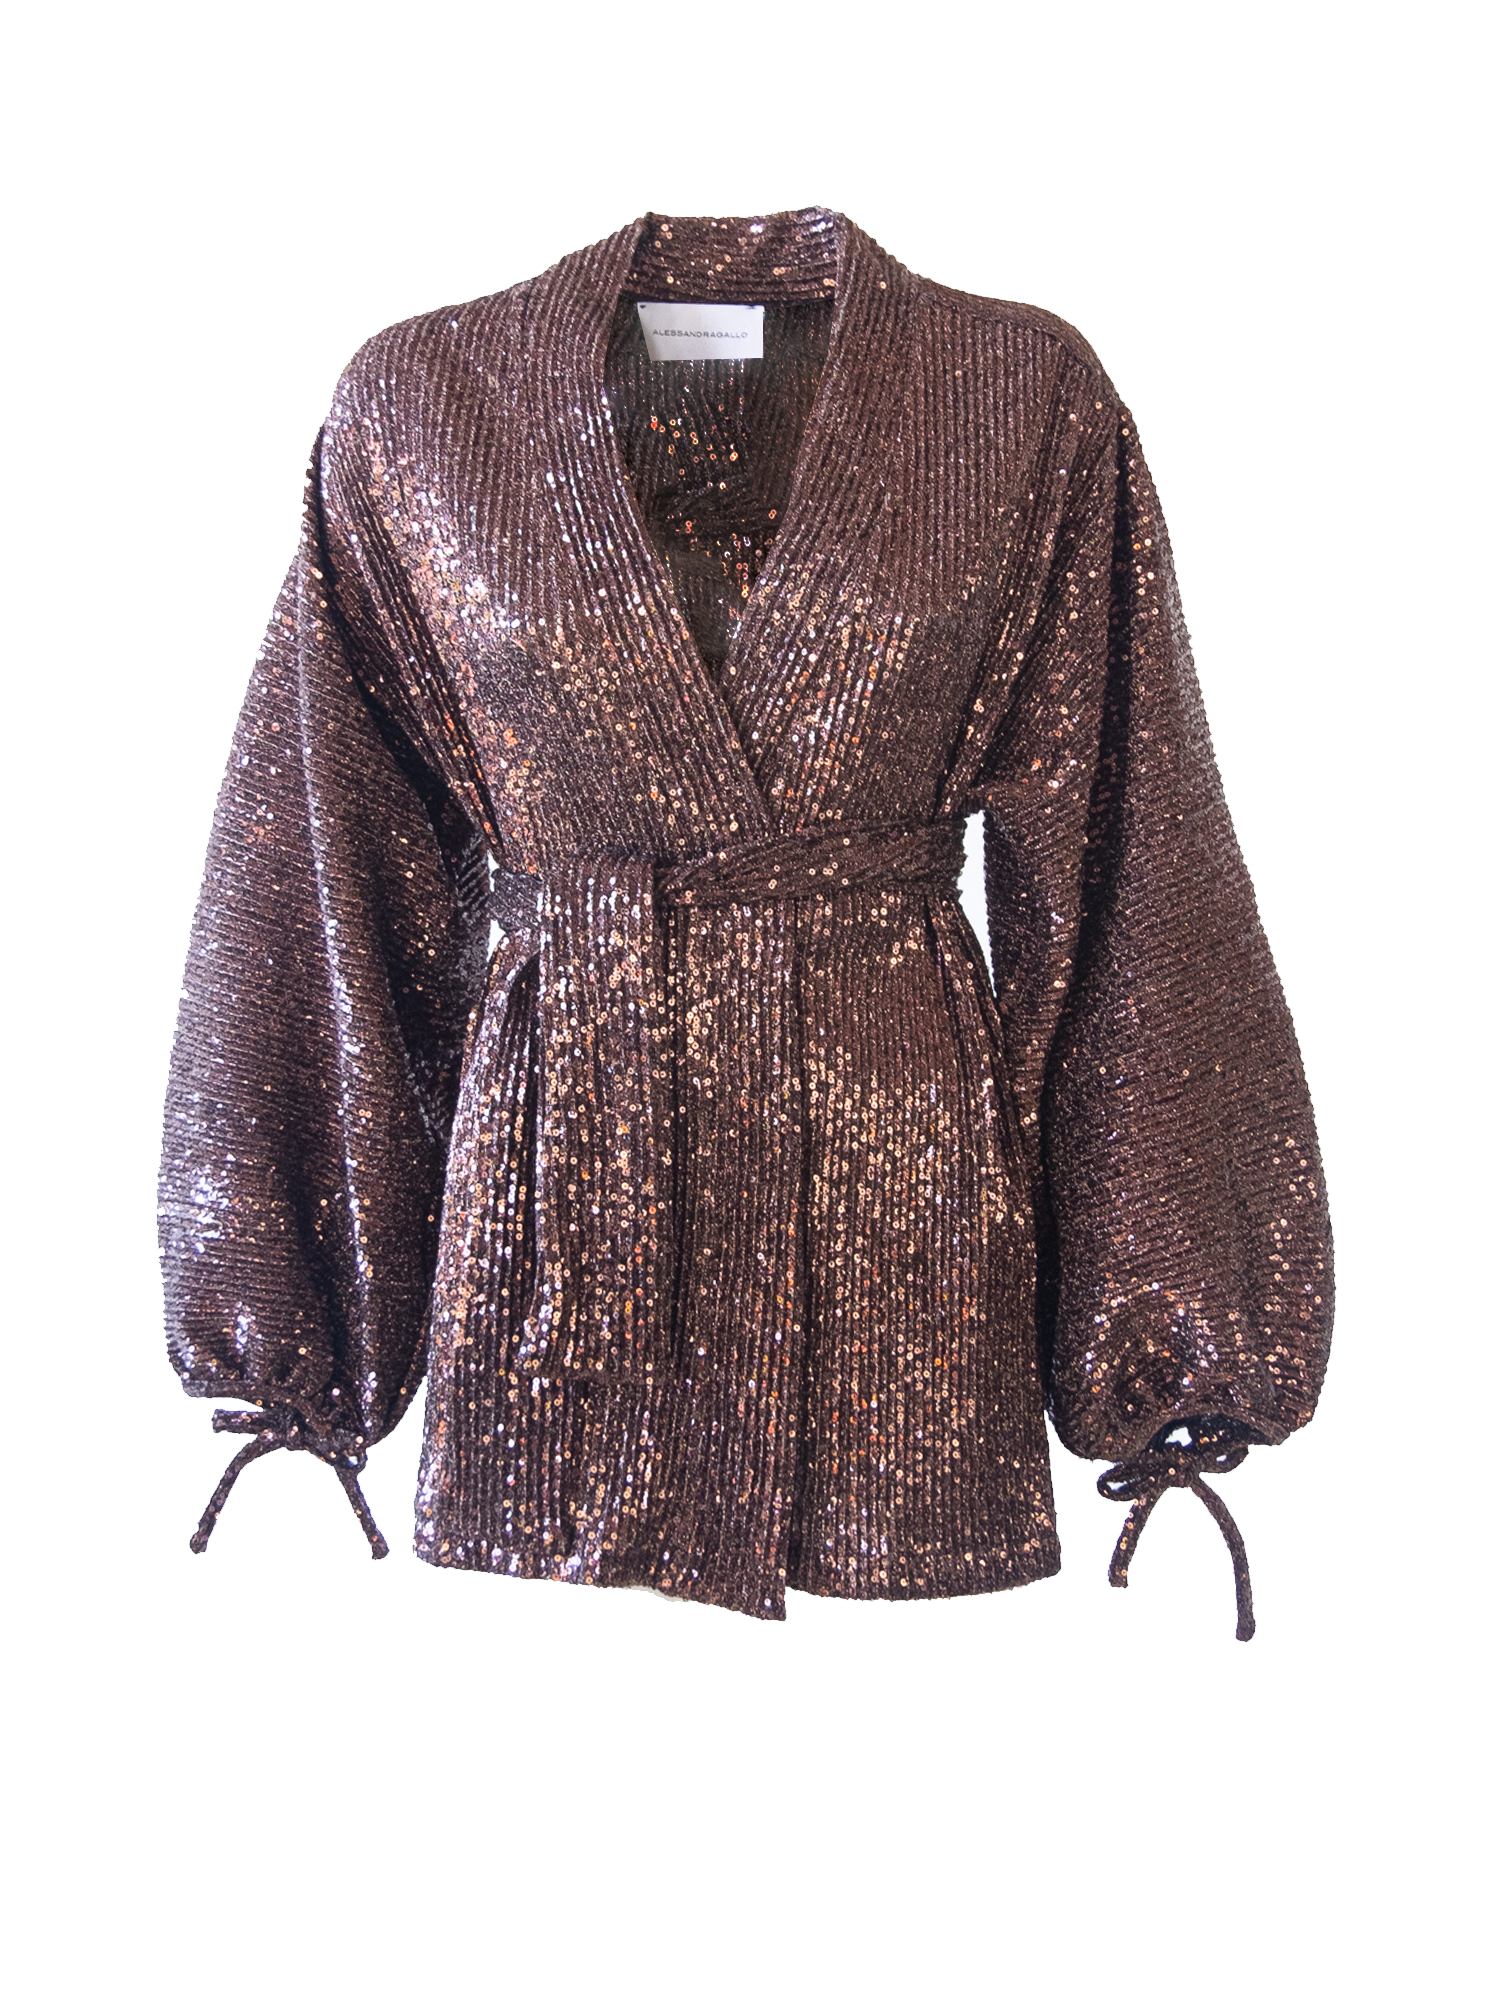 AMELIA - shirt with wide sleeves and sash in brown sequins